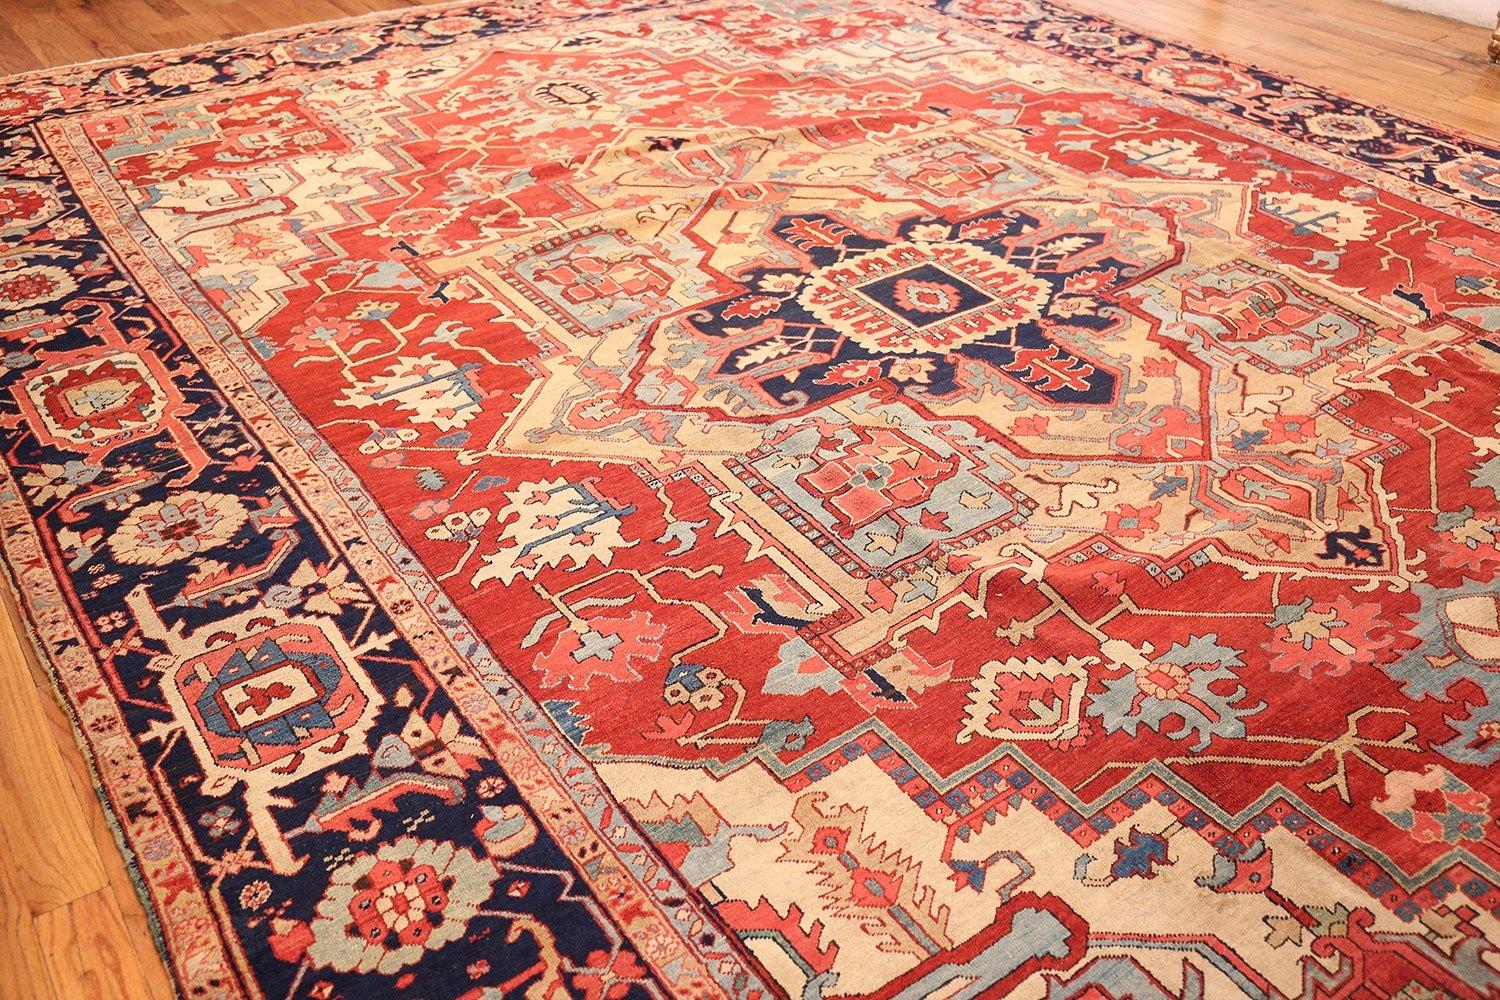 Large Antique Persian Heriz Serapi Rug, Country of Origin / Rug Type: Antique Persian Rug, Circa Date: 1900 – Size: 11 ft 2 in x 16 ft (3.4 m x 4.88 m)

Antique Persian Serapi carpets are known for their classic designs and use of brilliant color